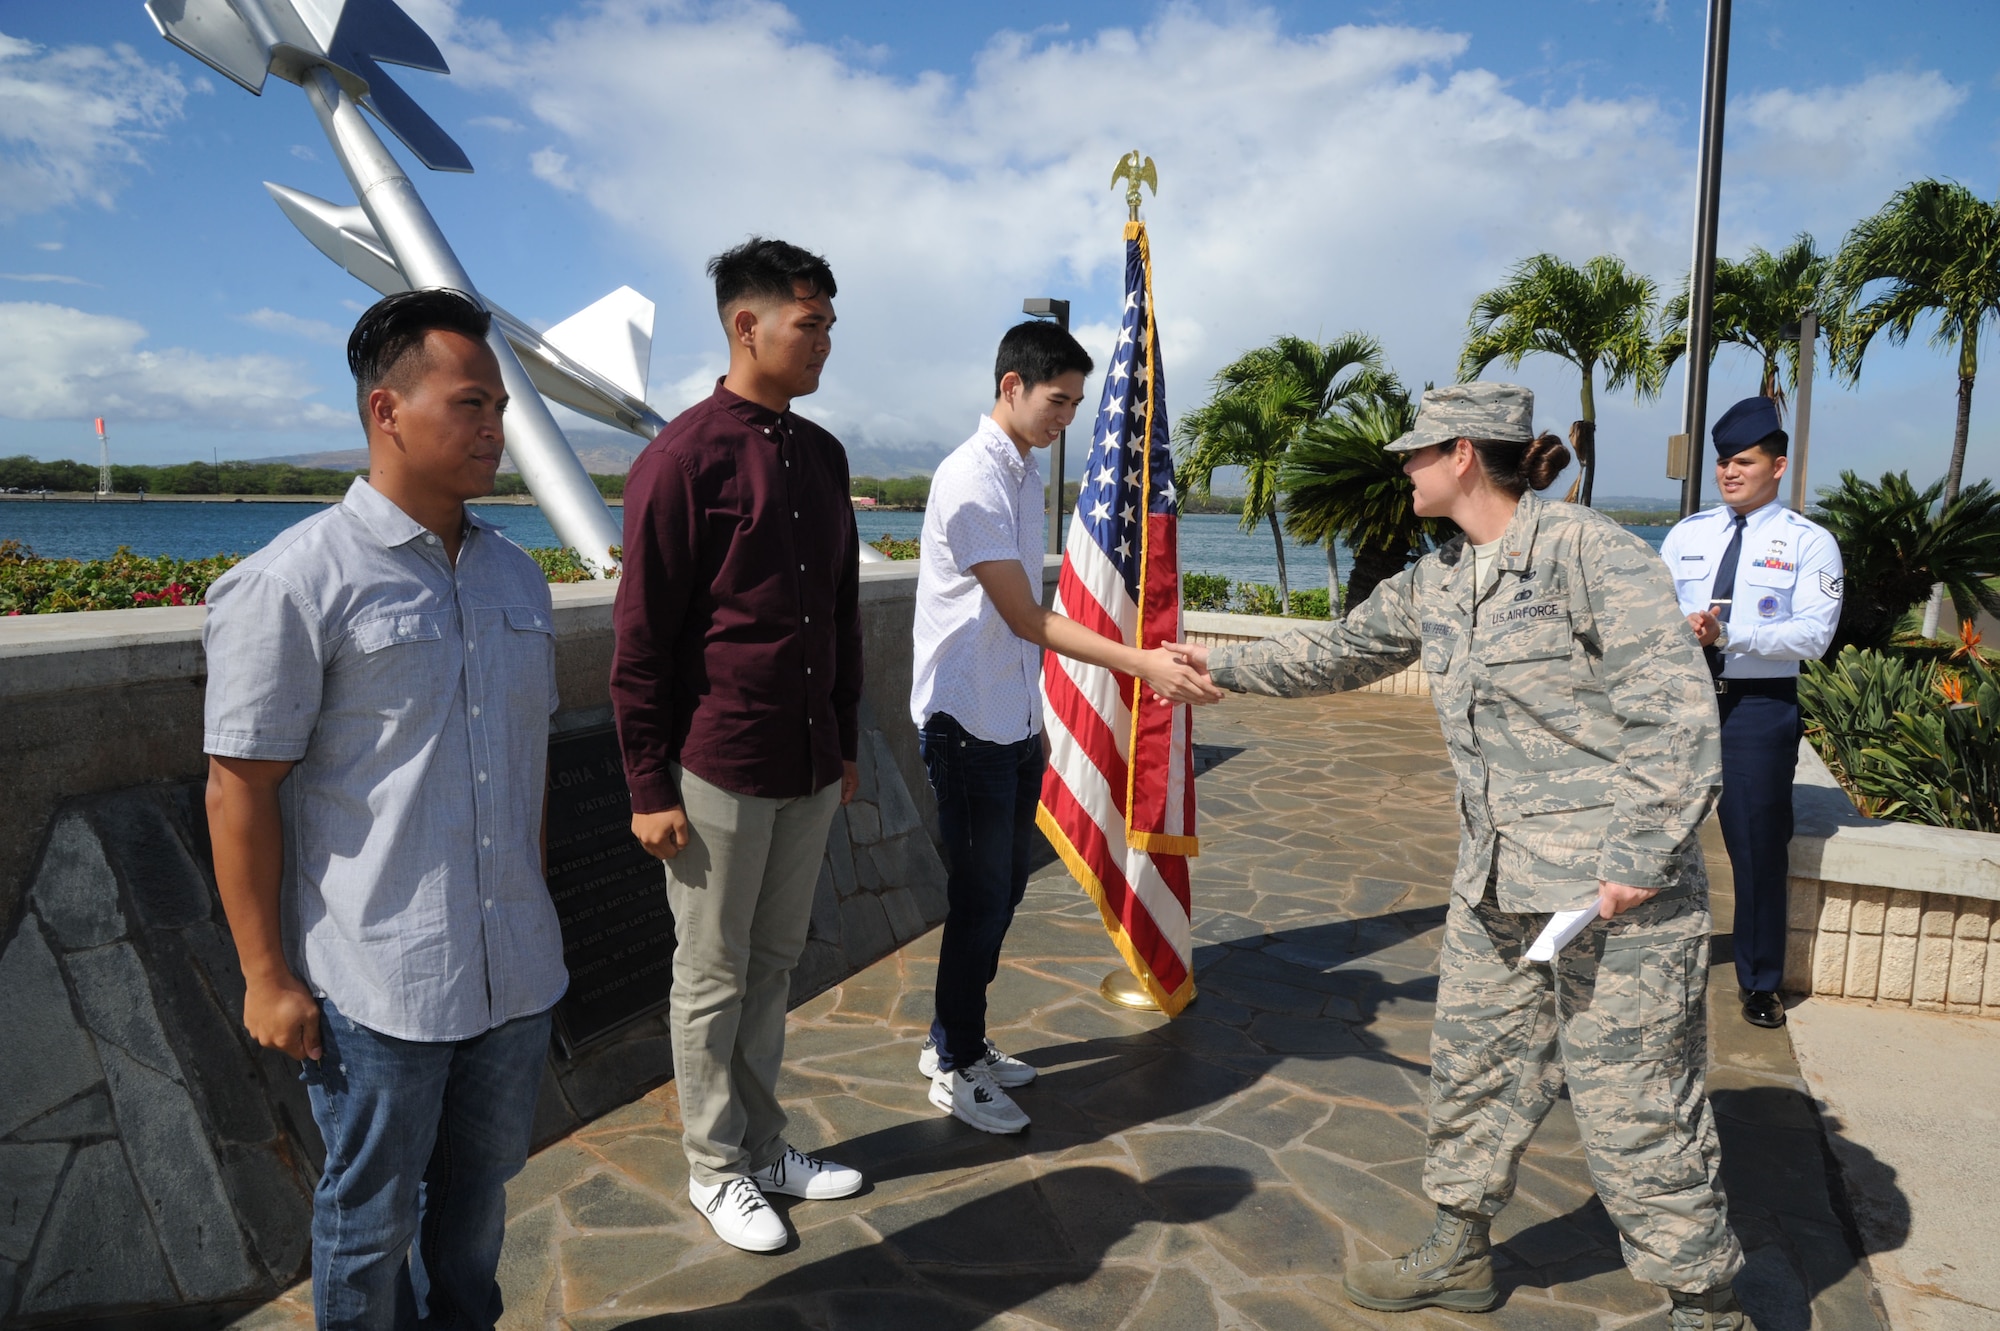 U.S. Air Force 2nd Lt. Elizabeth Andreas-Feeney, a member of the Air Force Reserve's 624th Regional Support Group, congratulates Allan Lai, of Honolulu, for enlisting in the Air Force Reserve at Joint Base Pearl Harbor-Hickam, Hawaii, Nov. 30, 2016. Left to right: Mark Corpuz, of Ewa Beach, will be joining the 624th Aeromedical Staging Squadron as a medical admin, and Bryson Primacio, of Kapolei, is joining the 48th Aerial Port Squadron as Air Transportation specialists. The 624th ASTS and the 48th APS support the 624th Regional Support Group's mission to deliver mission essential capability through combat readiness, quality management and peacetime deployments in the Pacific area of responsibility. (U.S. Air Force photo by Master Sgt. Theanne Herrmann)